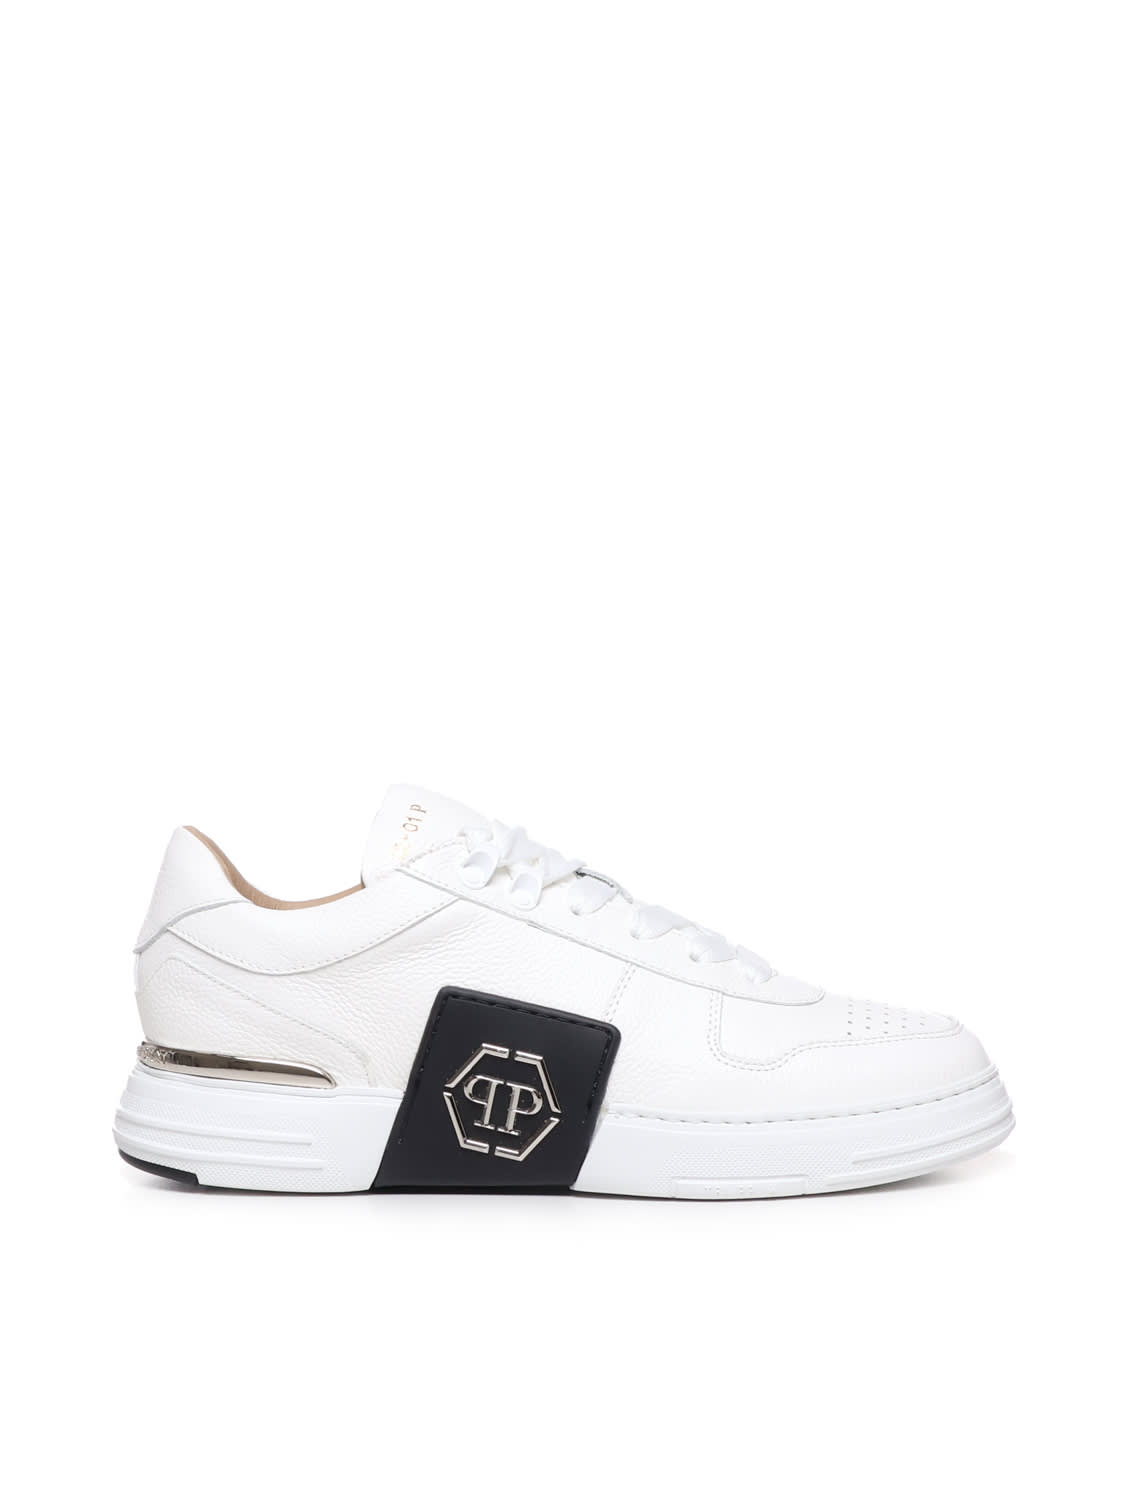 PHILIPP PLEIN LEATHER SNEAKERS WITH PP LOGO